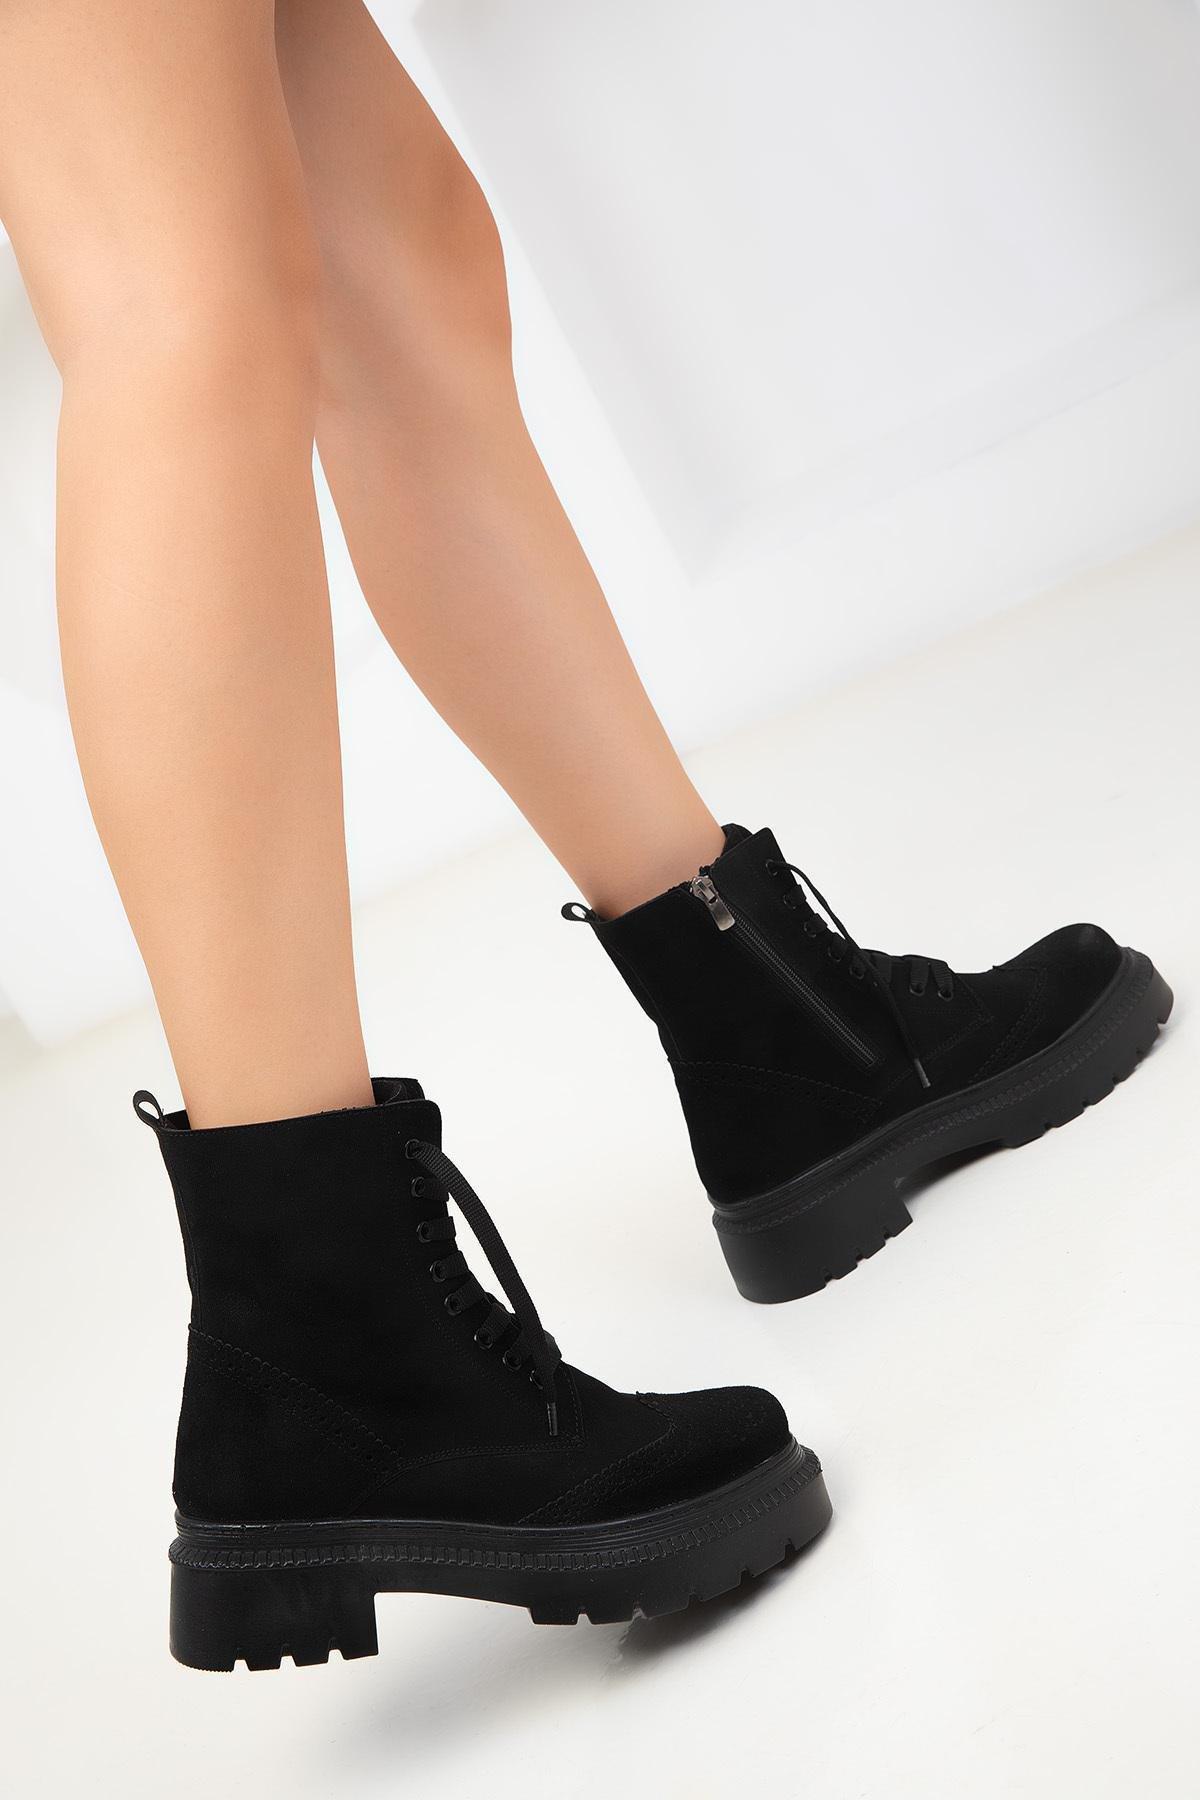 SOHO - Black Suede Boots